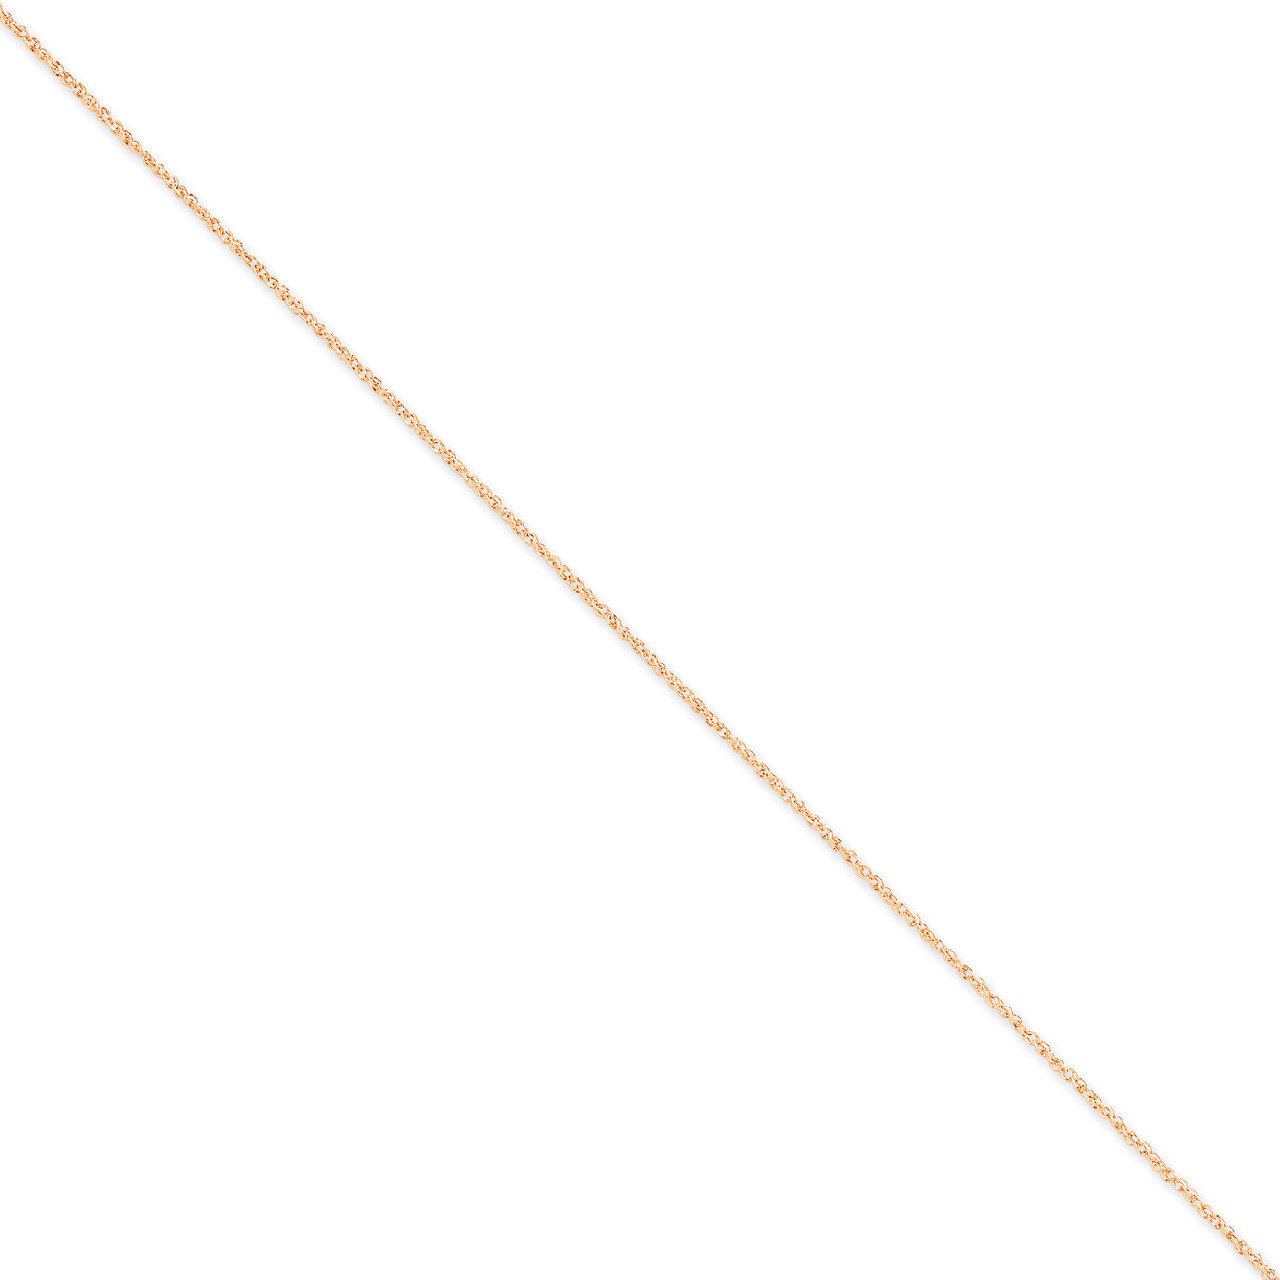 1.1mm Ropa Chain 18 Inch 14k Rose Gold RSC27-18